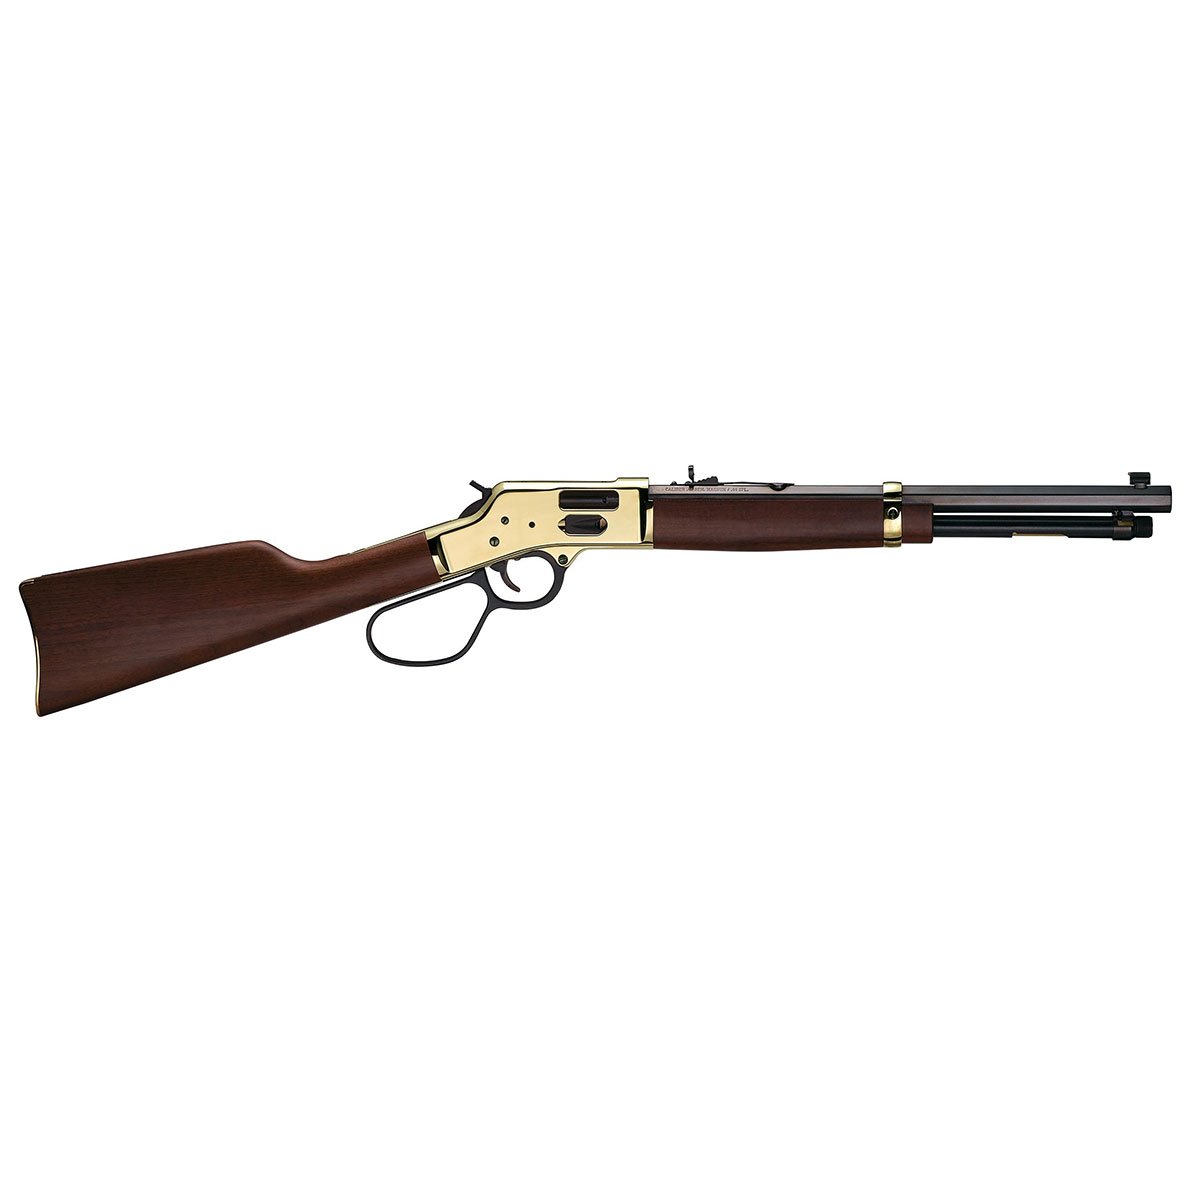 HENRY REPEATING ARMS - BIG BOY BRASS LARGE LOOP 44 MAGNU/44 SPECIAL LEVER ACTION RIFLE